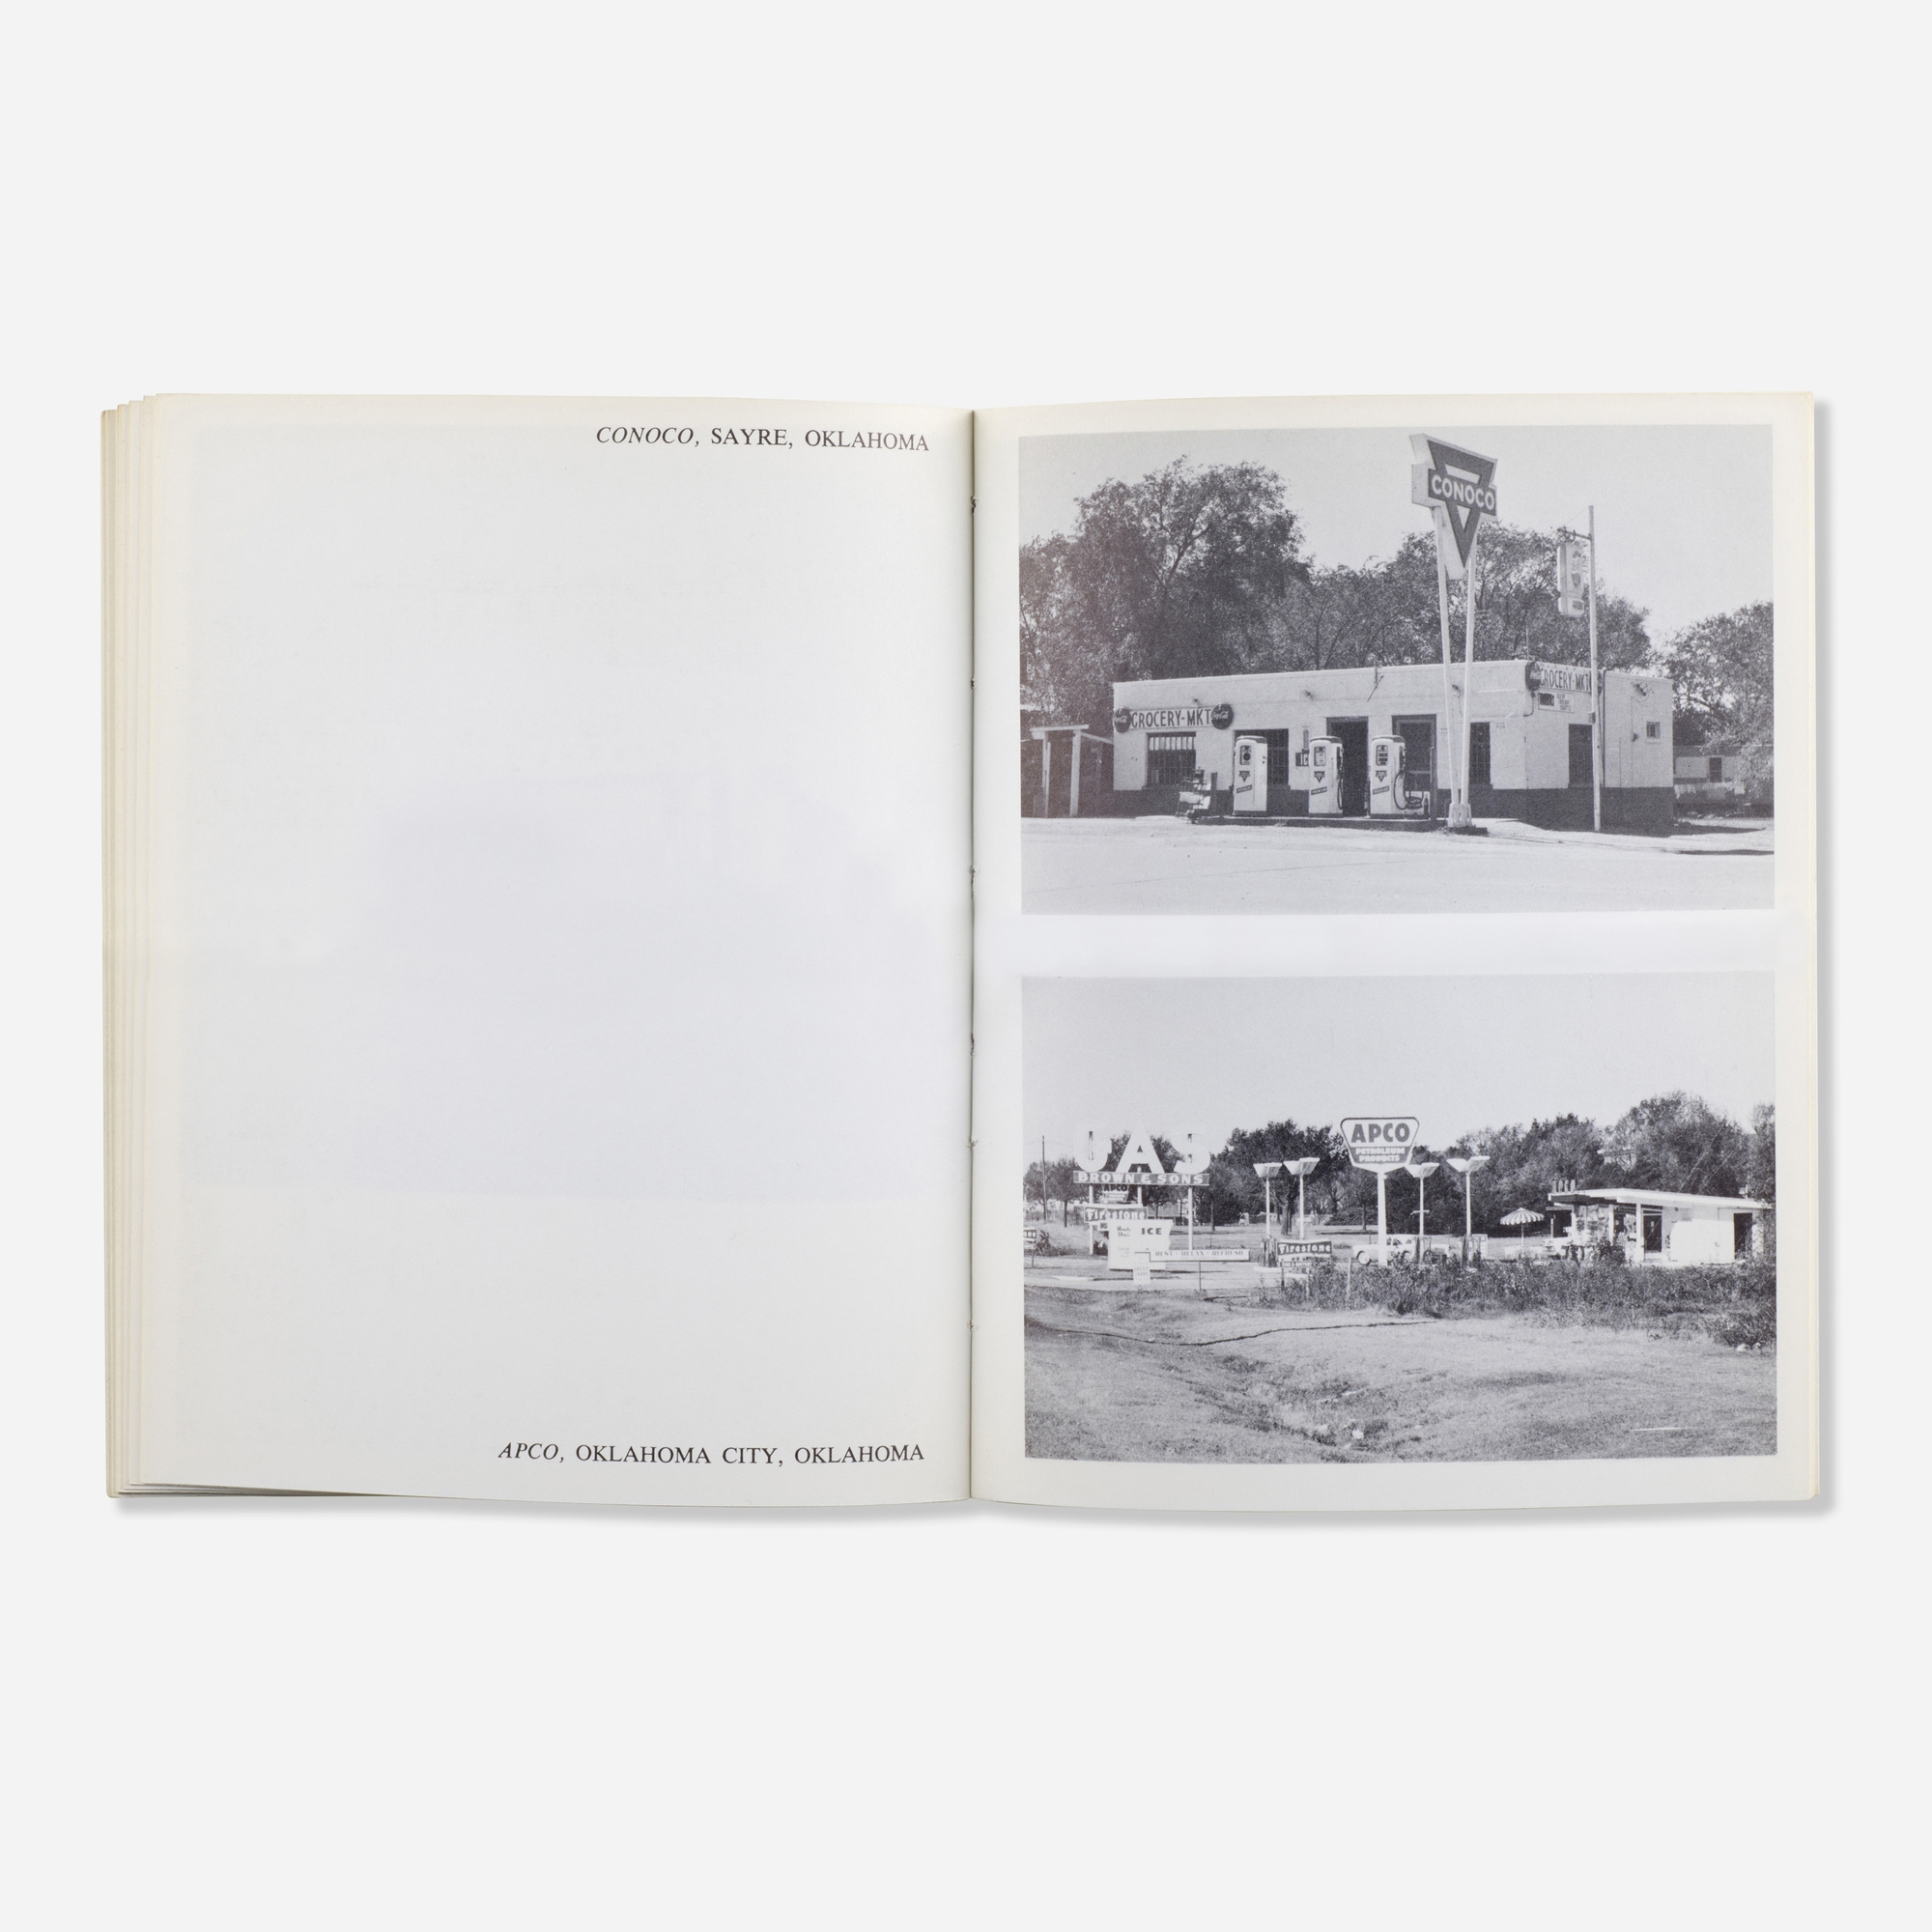 Artwork by Ed Ruscha, Twentysix Gasoline Stations, Made of black offset  printing on white paper in bound book